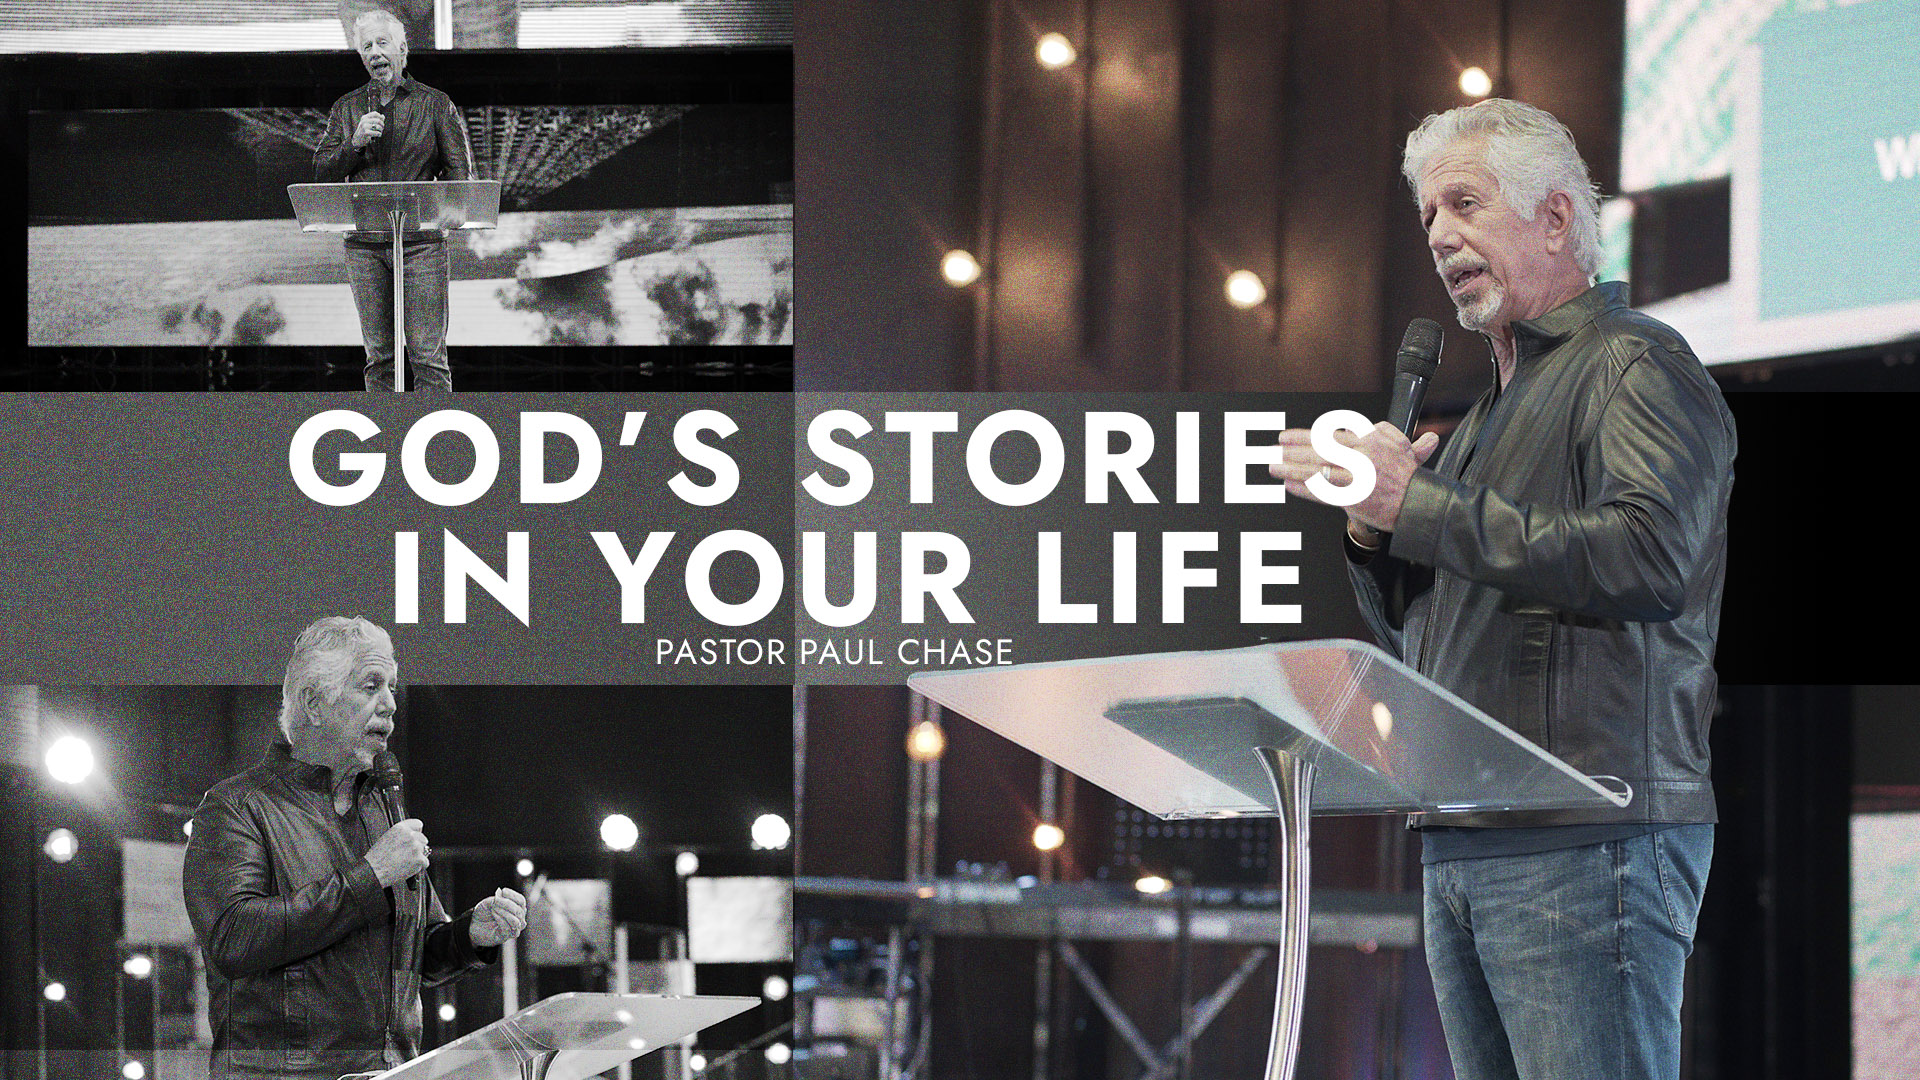 GOD STORIES IN YOUR LIFE